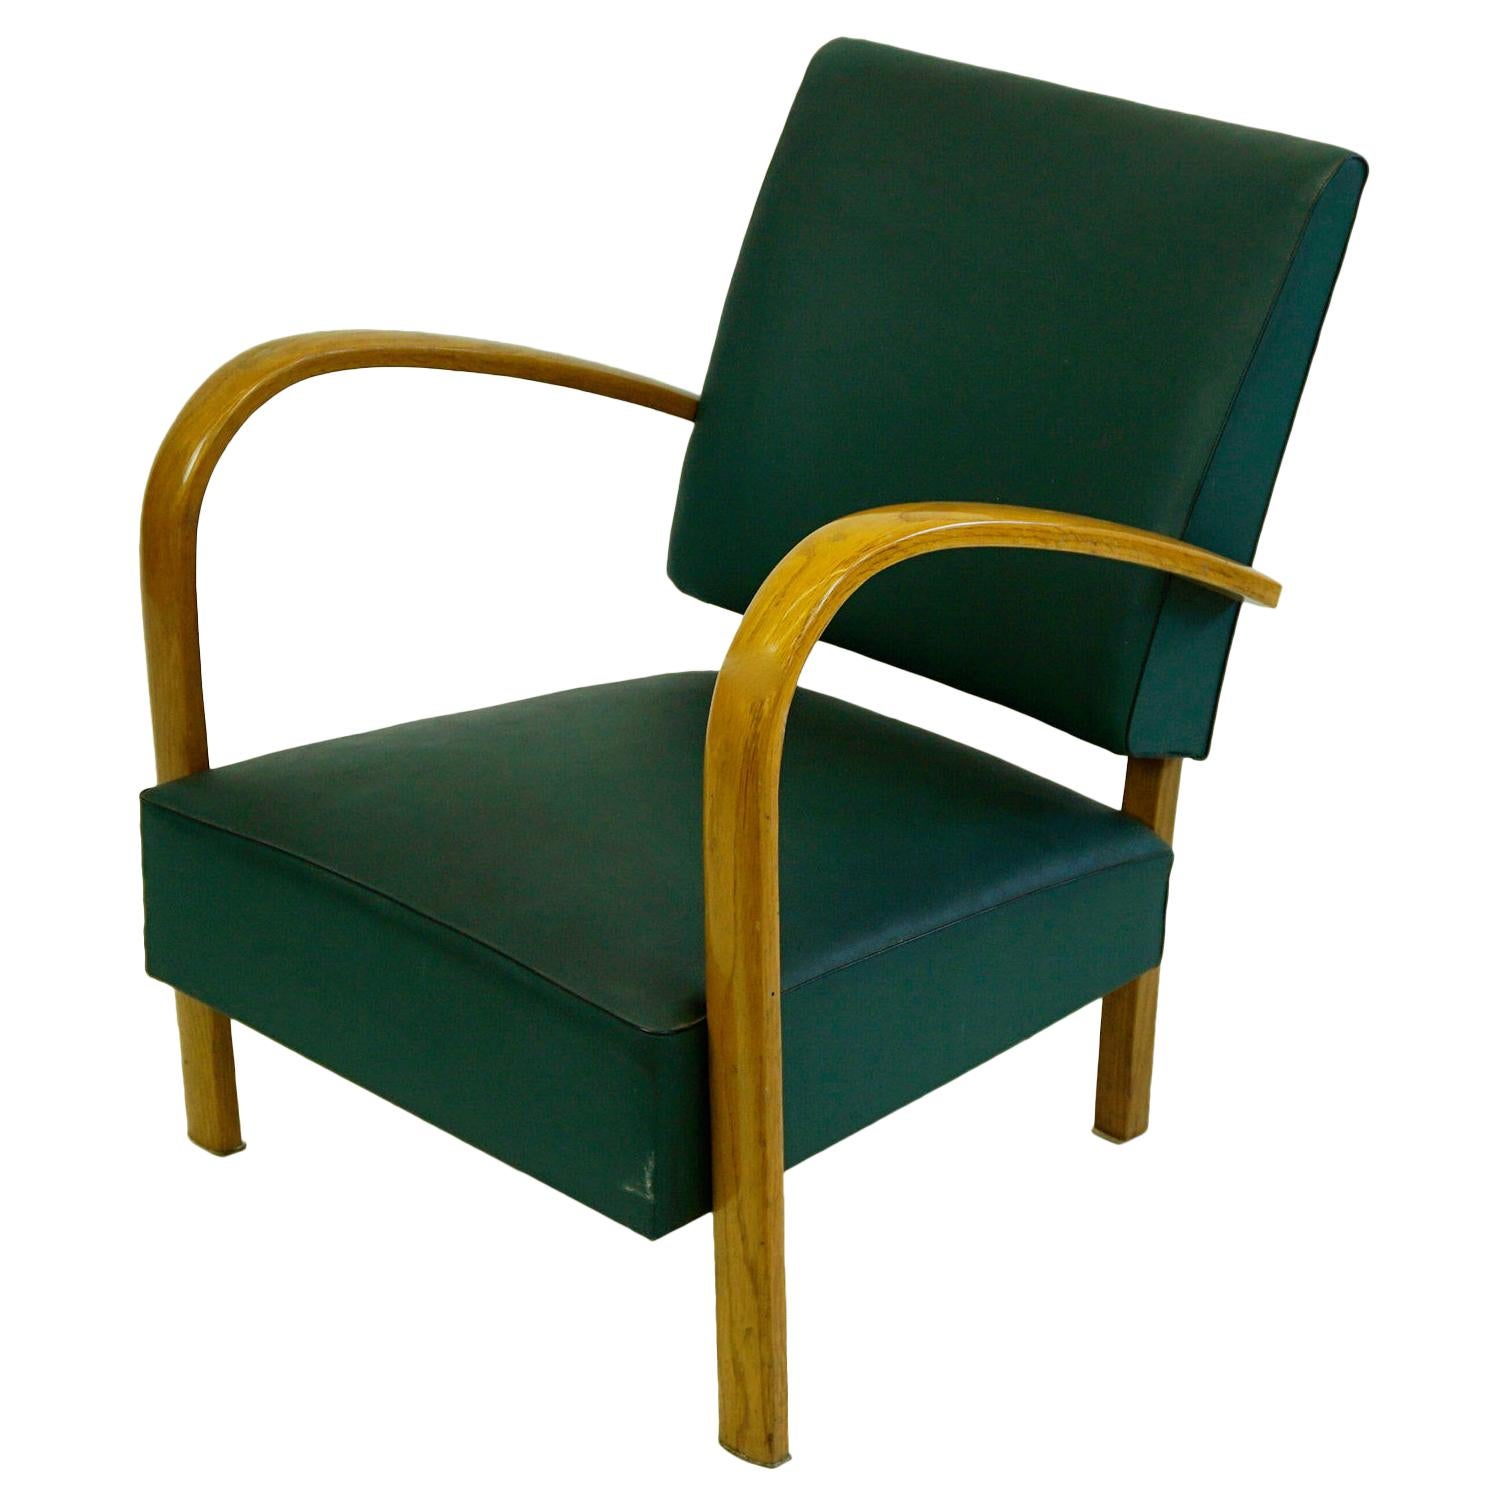 Italian Midcentury Beech Lounge Chair with Green Leatherette